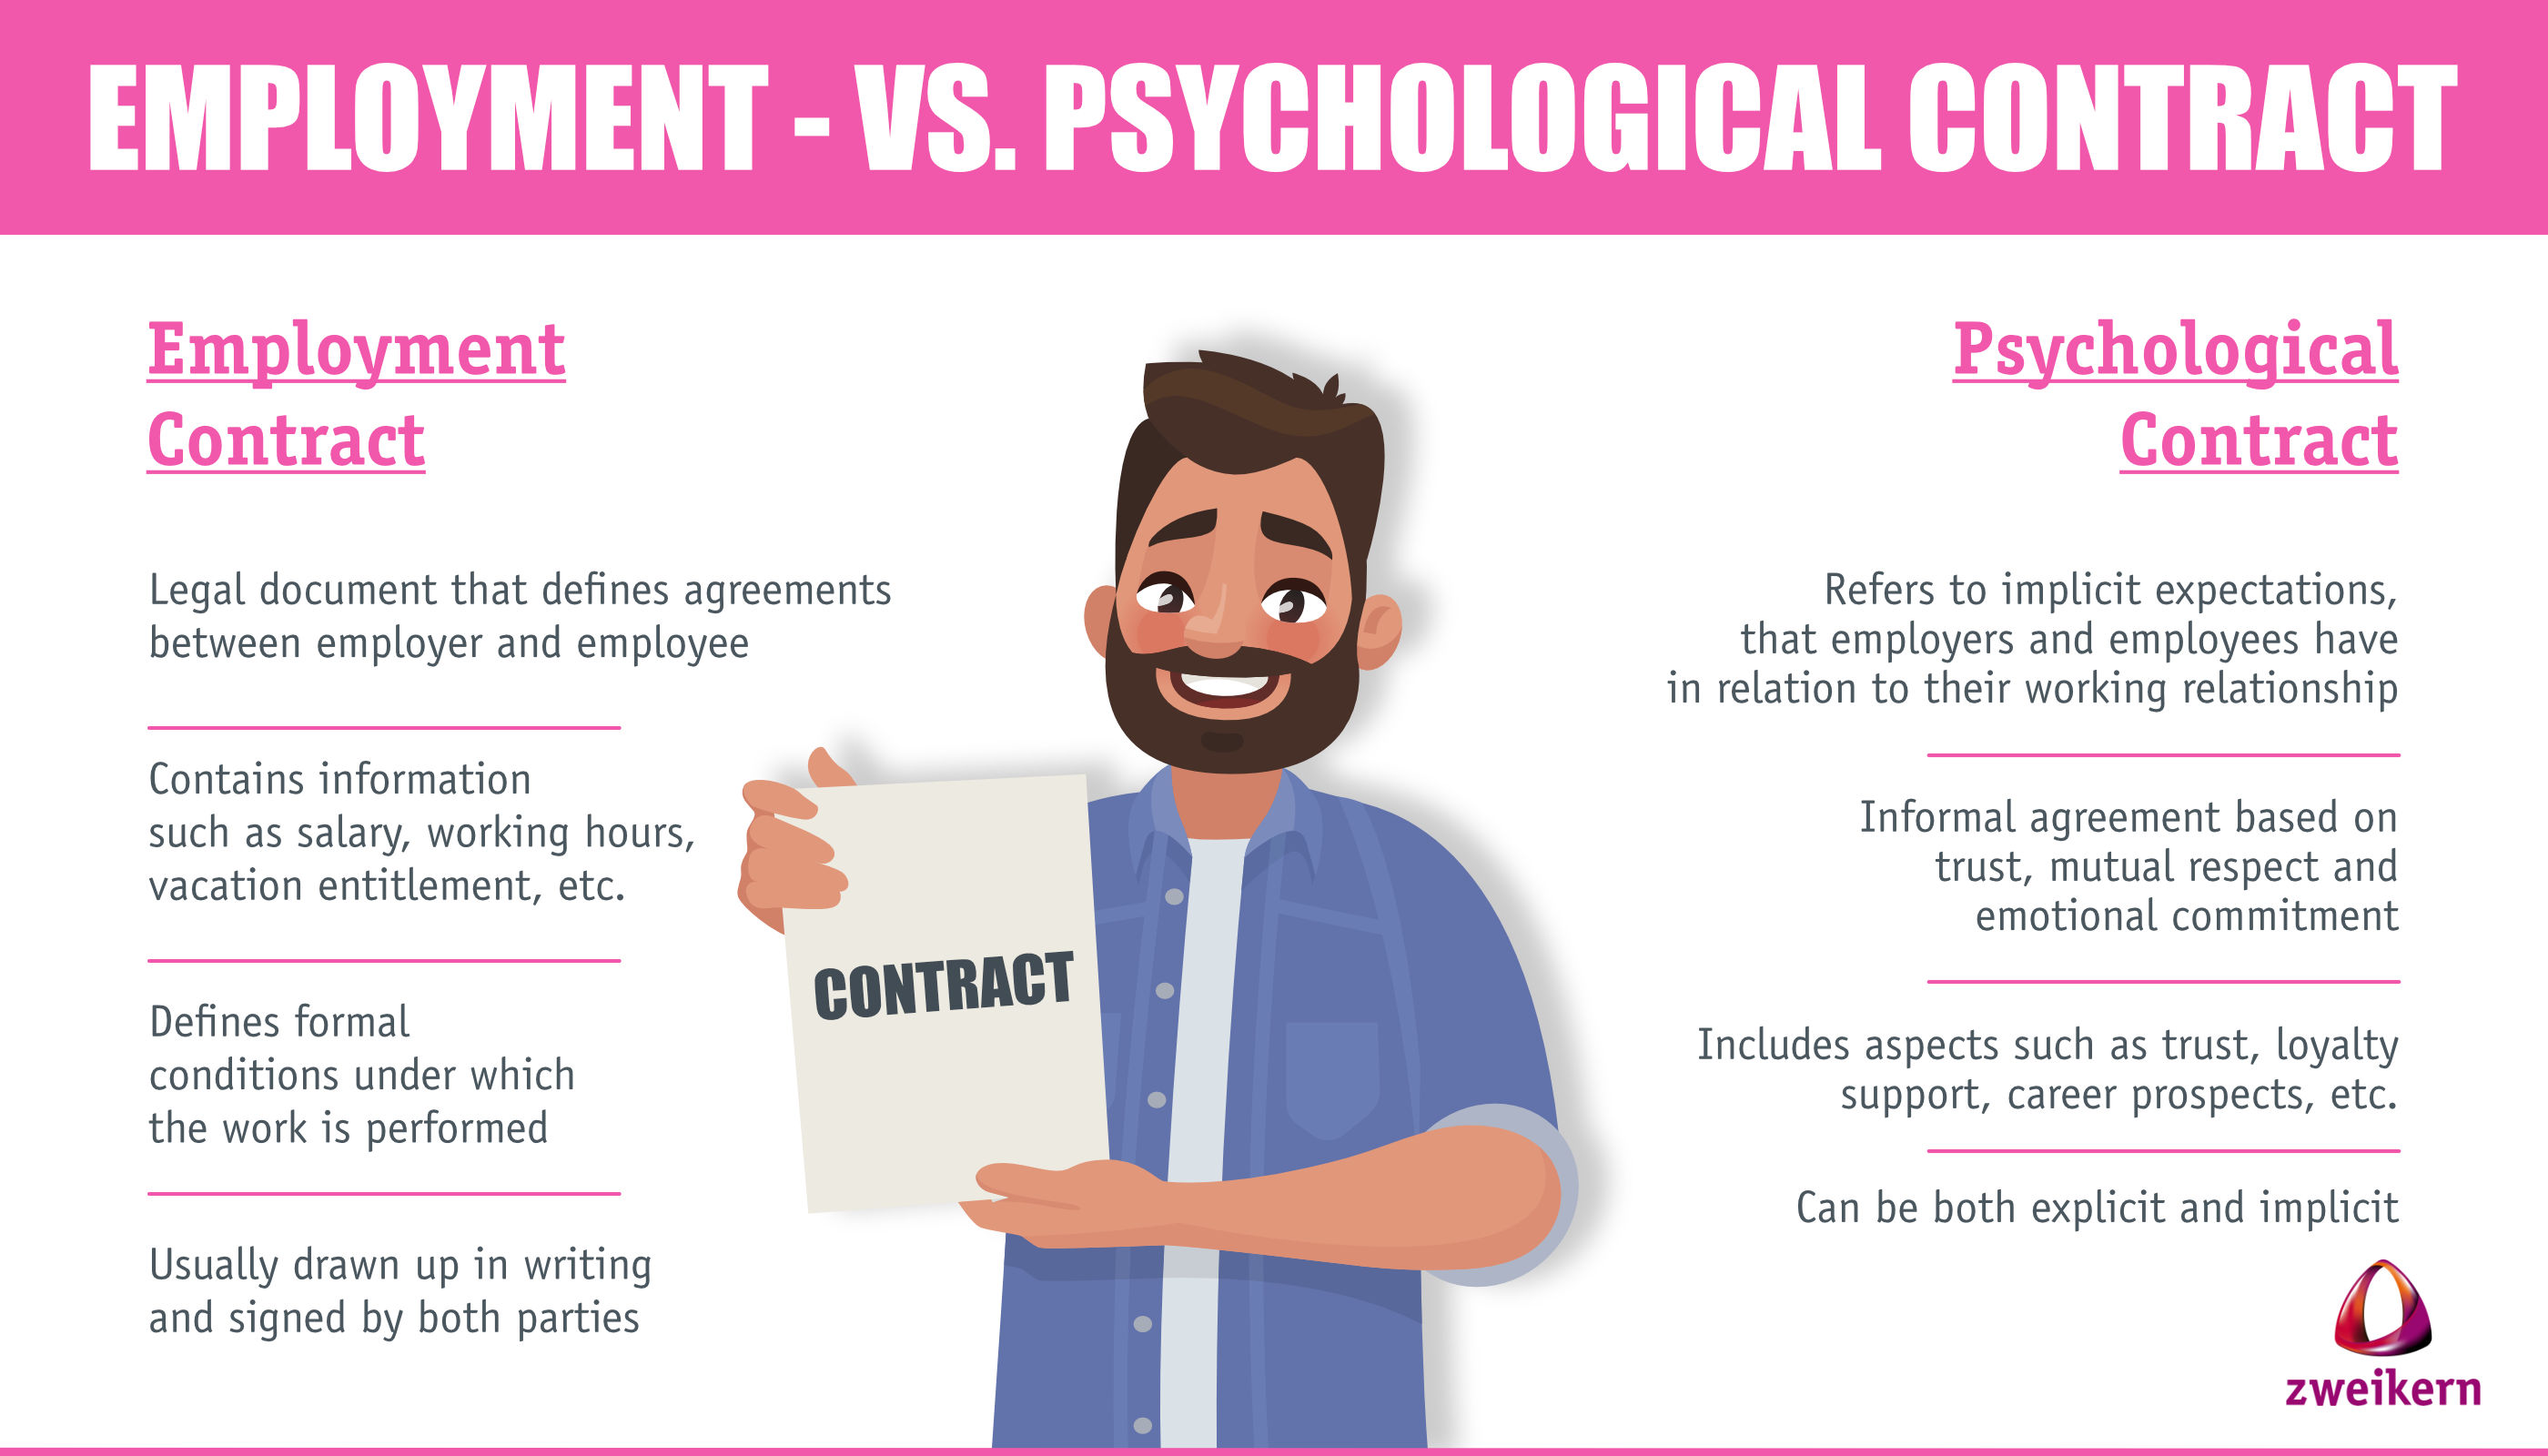 Infographic about psychological contracts